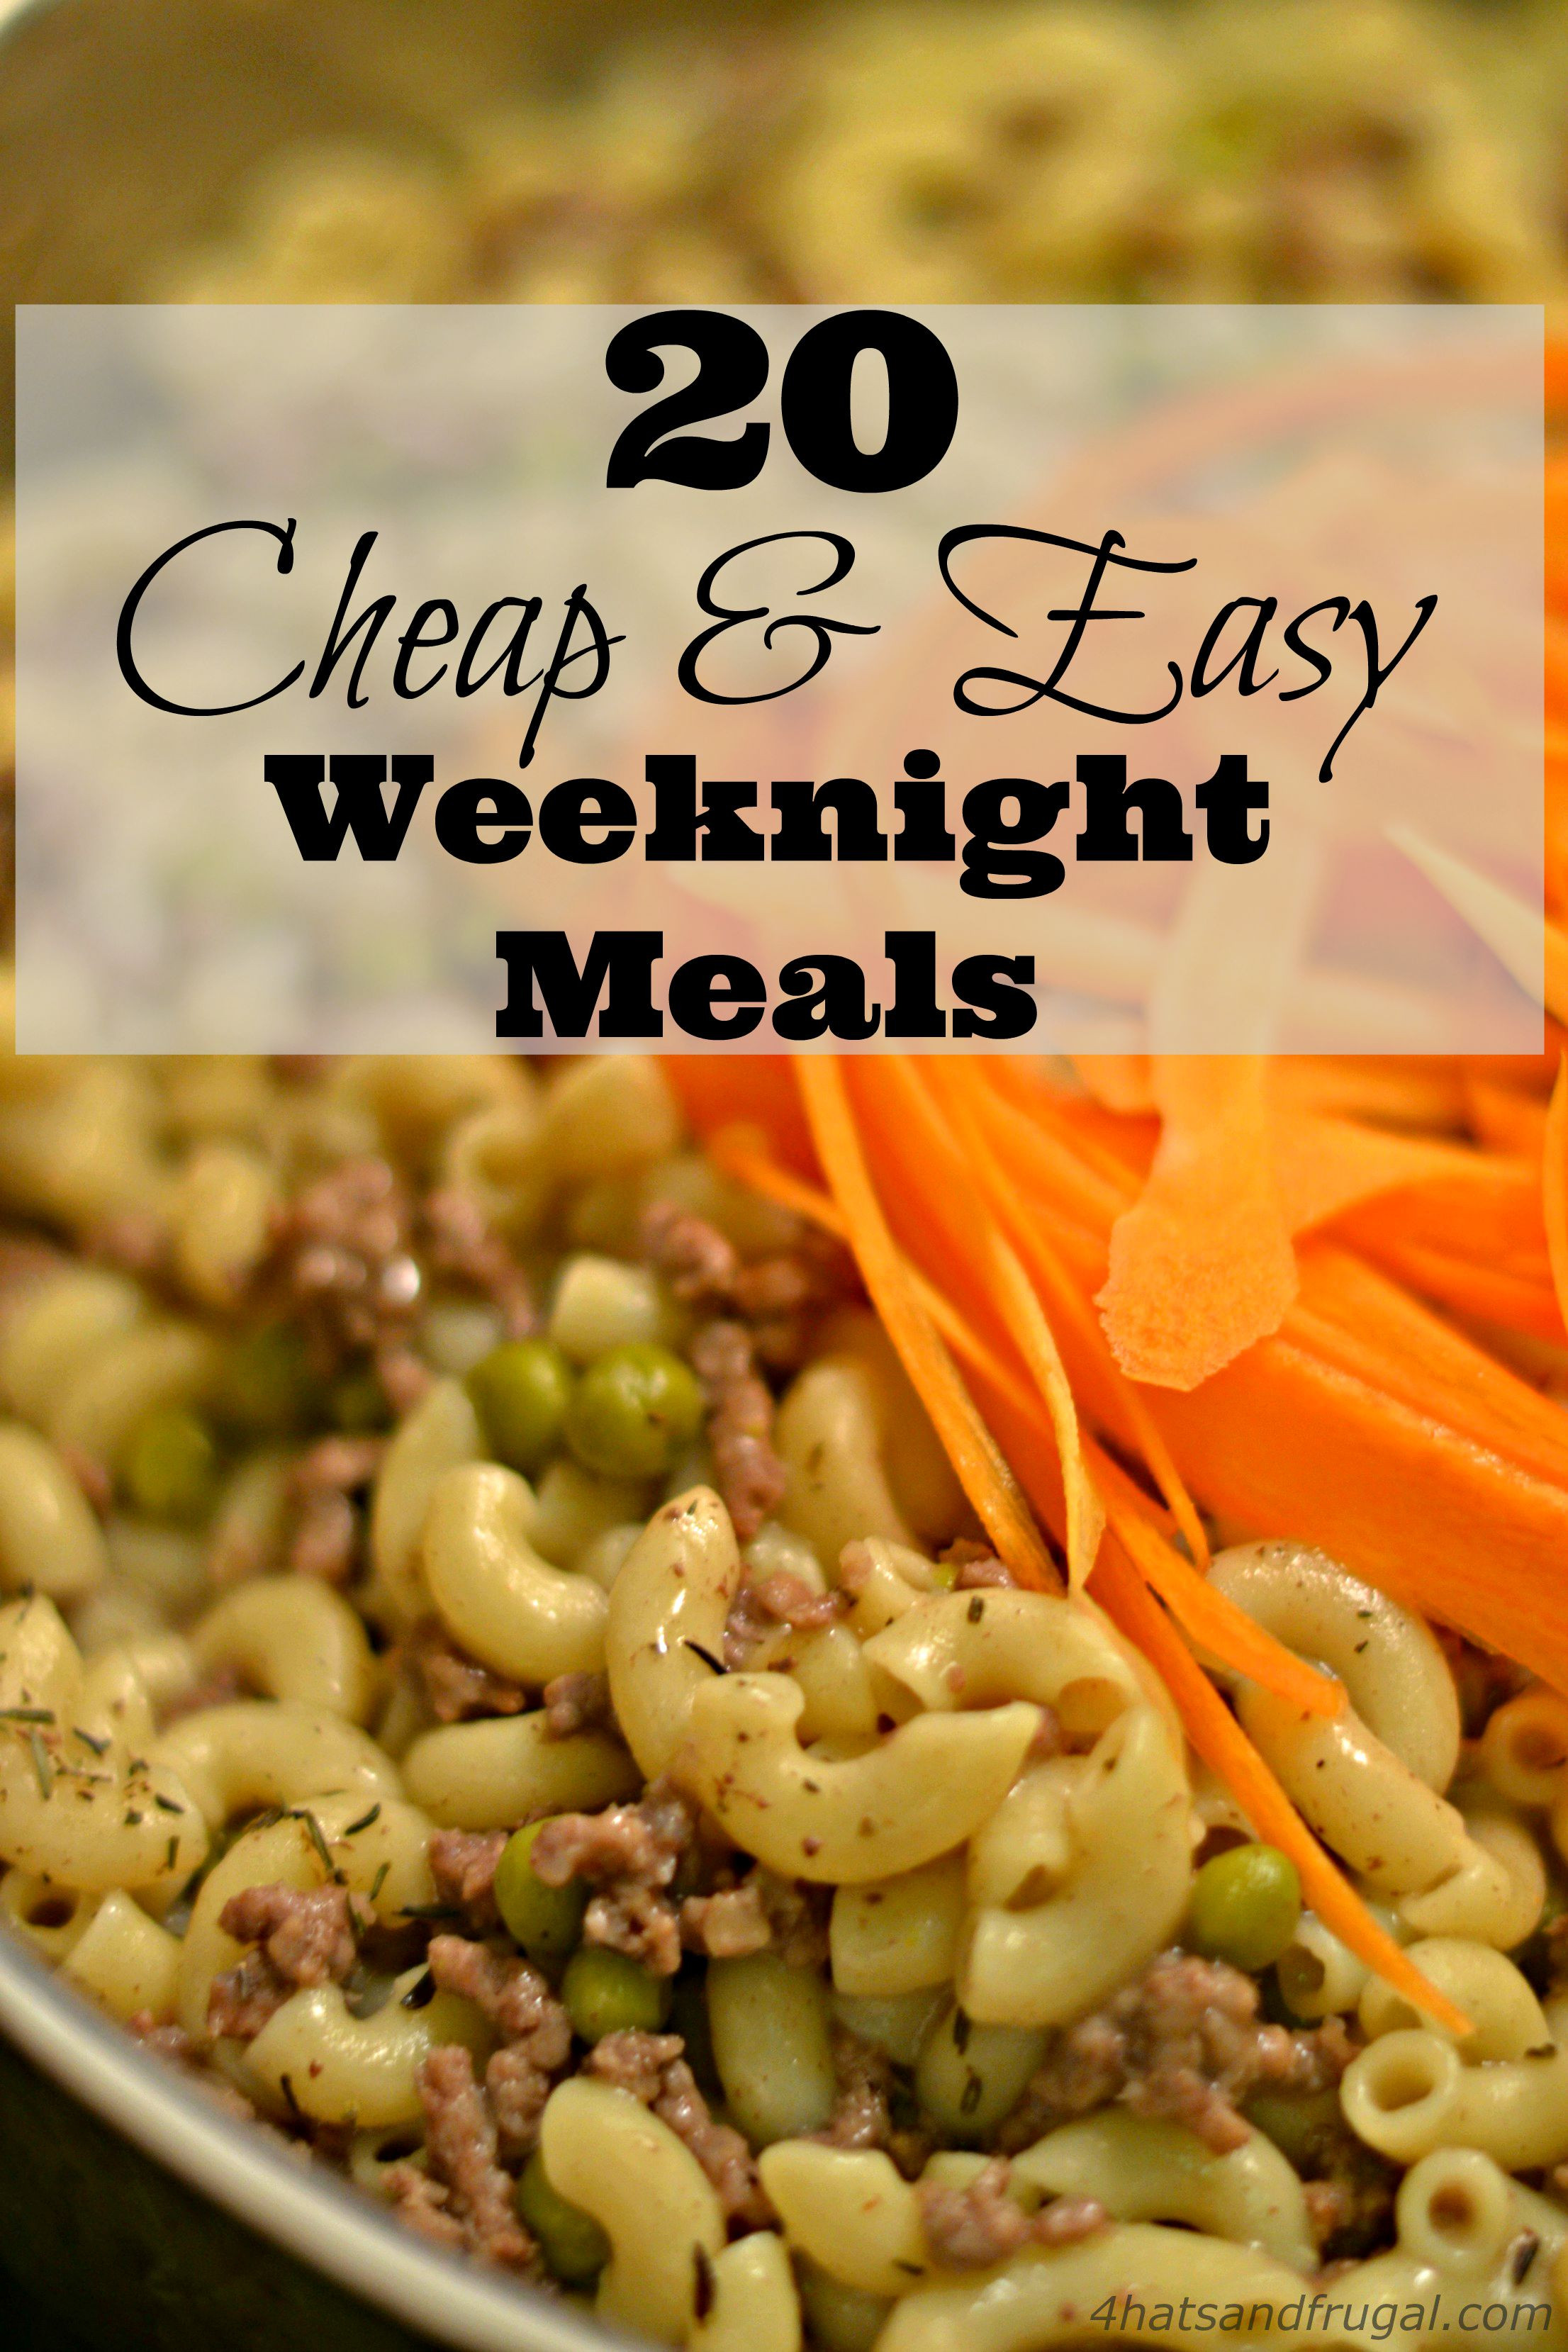 Cheap Easy Dinners
 20 Cheap & Easy Weeknight Meals 4 Hats and Frugal